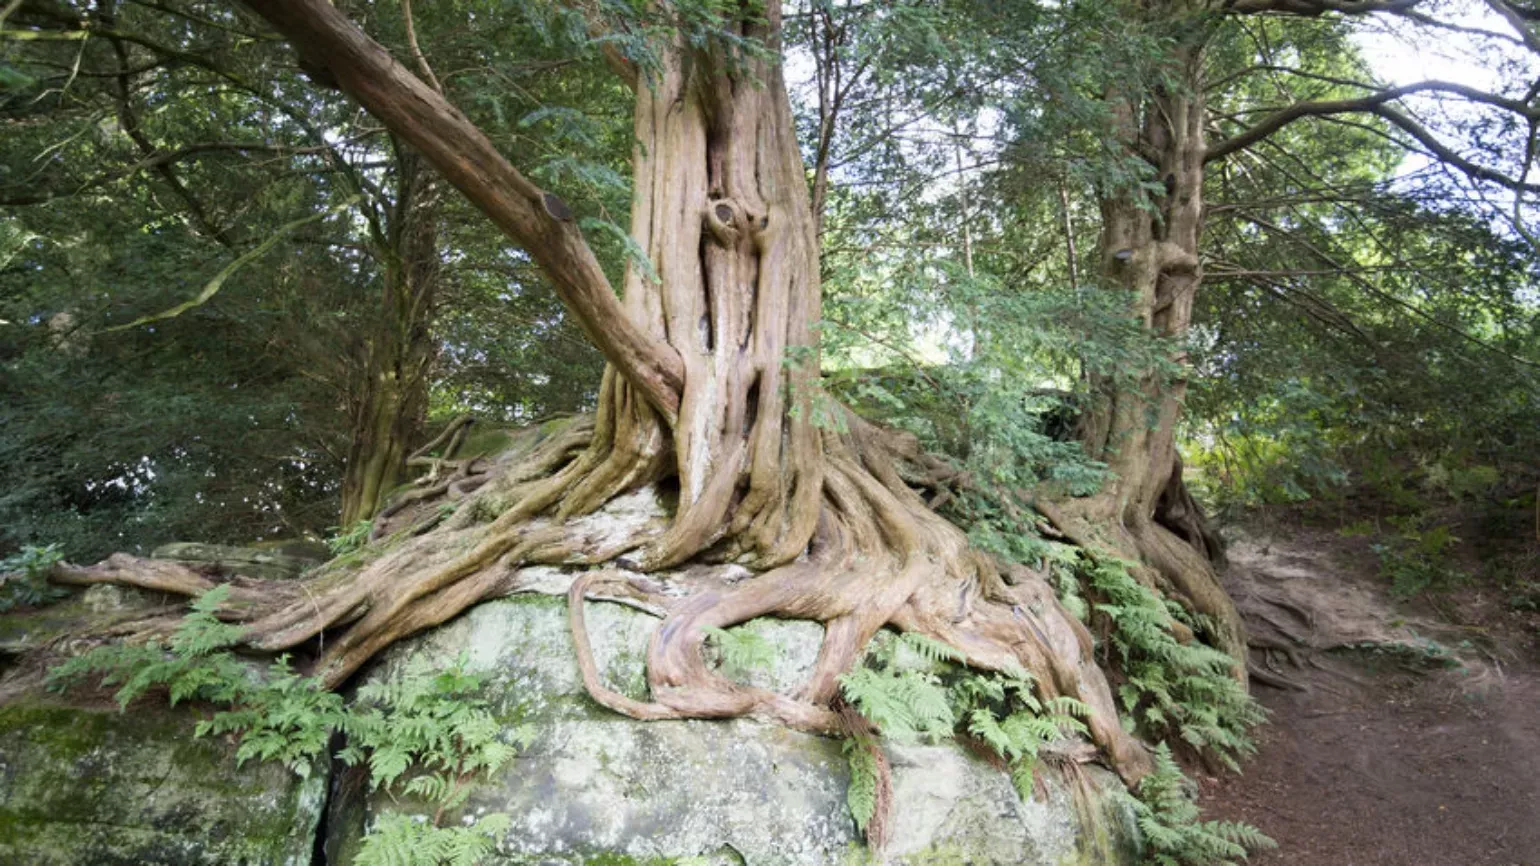 Yew tangling roots over rock